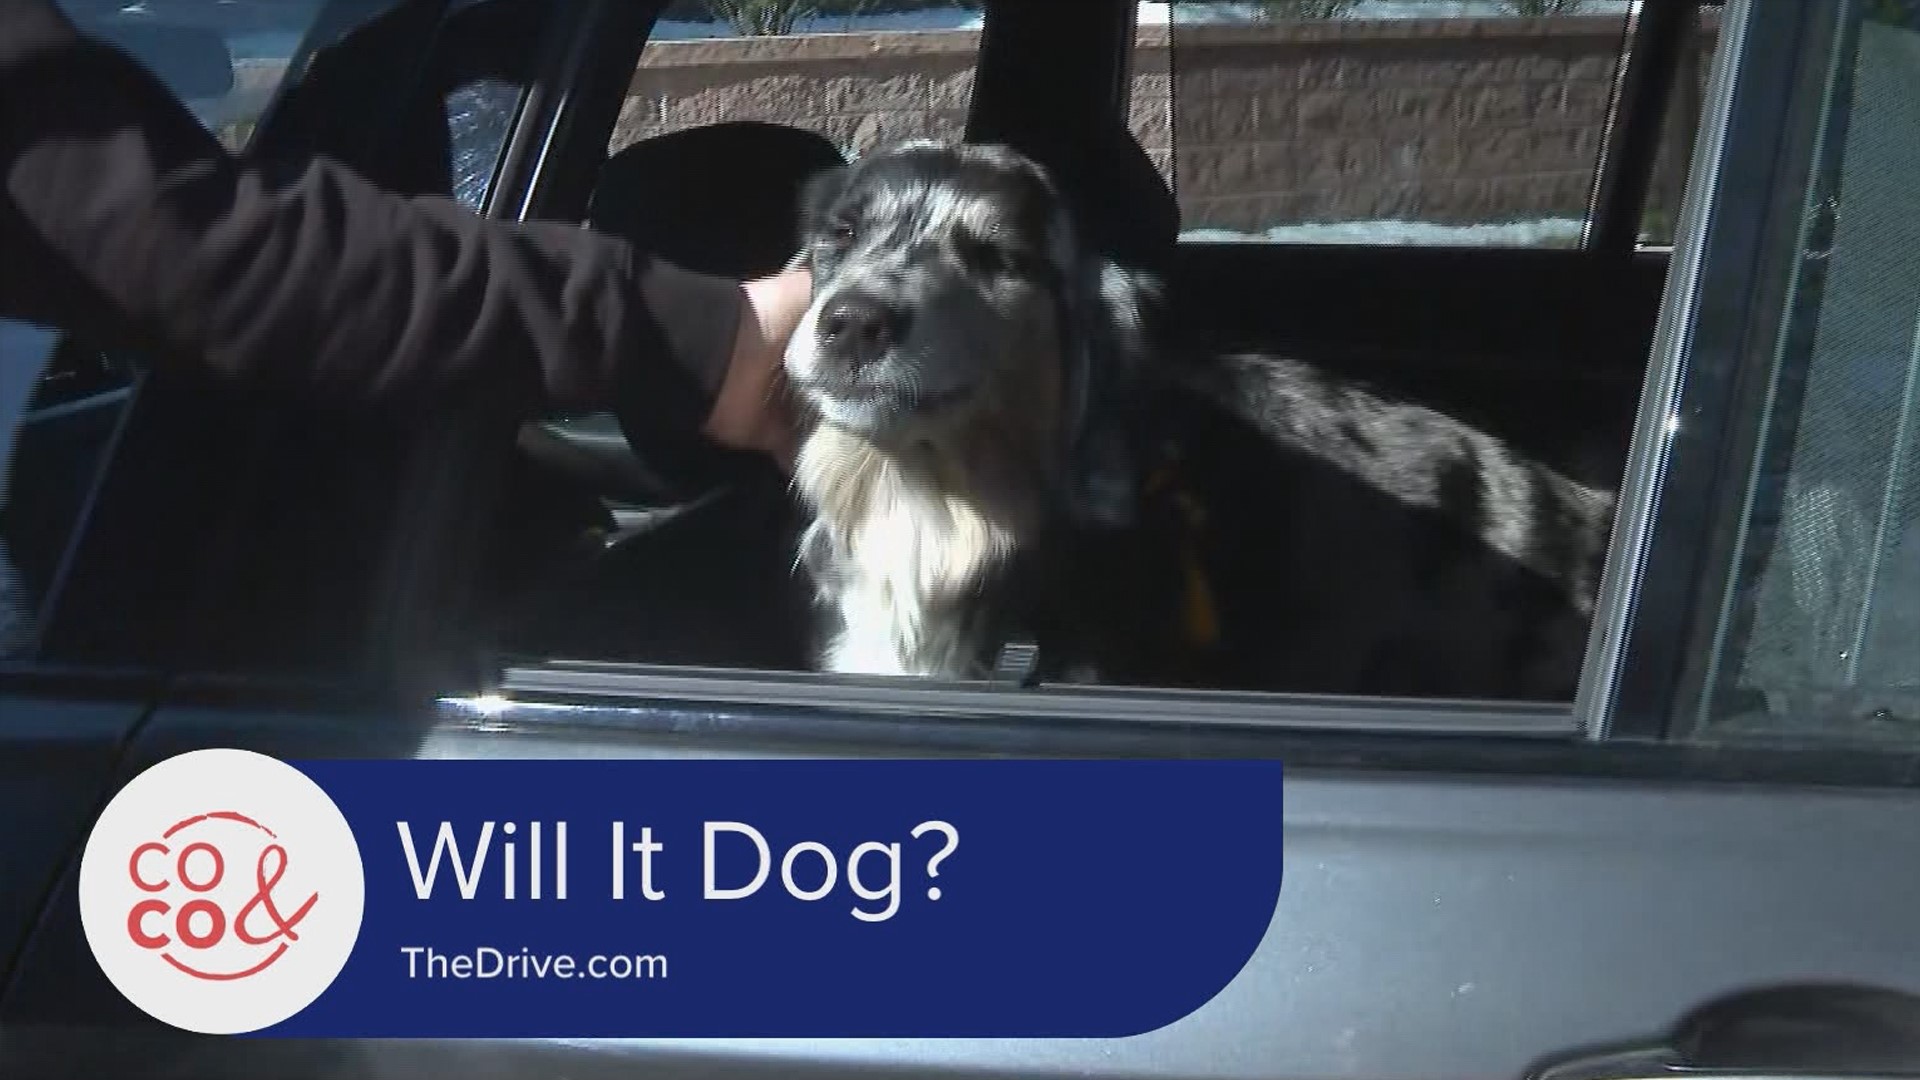 Does your car dog? To see the entire "Will It Dog?" series go to TheDrive.com and subscribe on you tube.